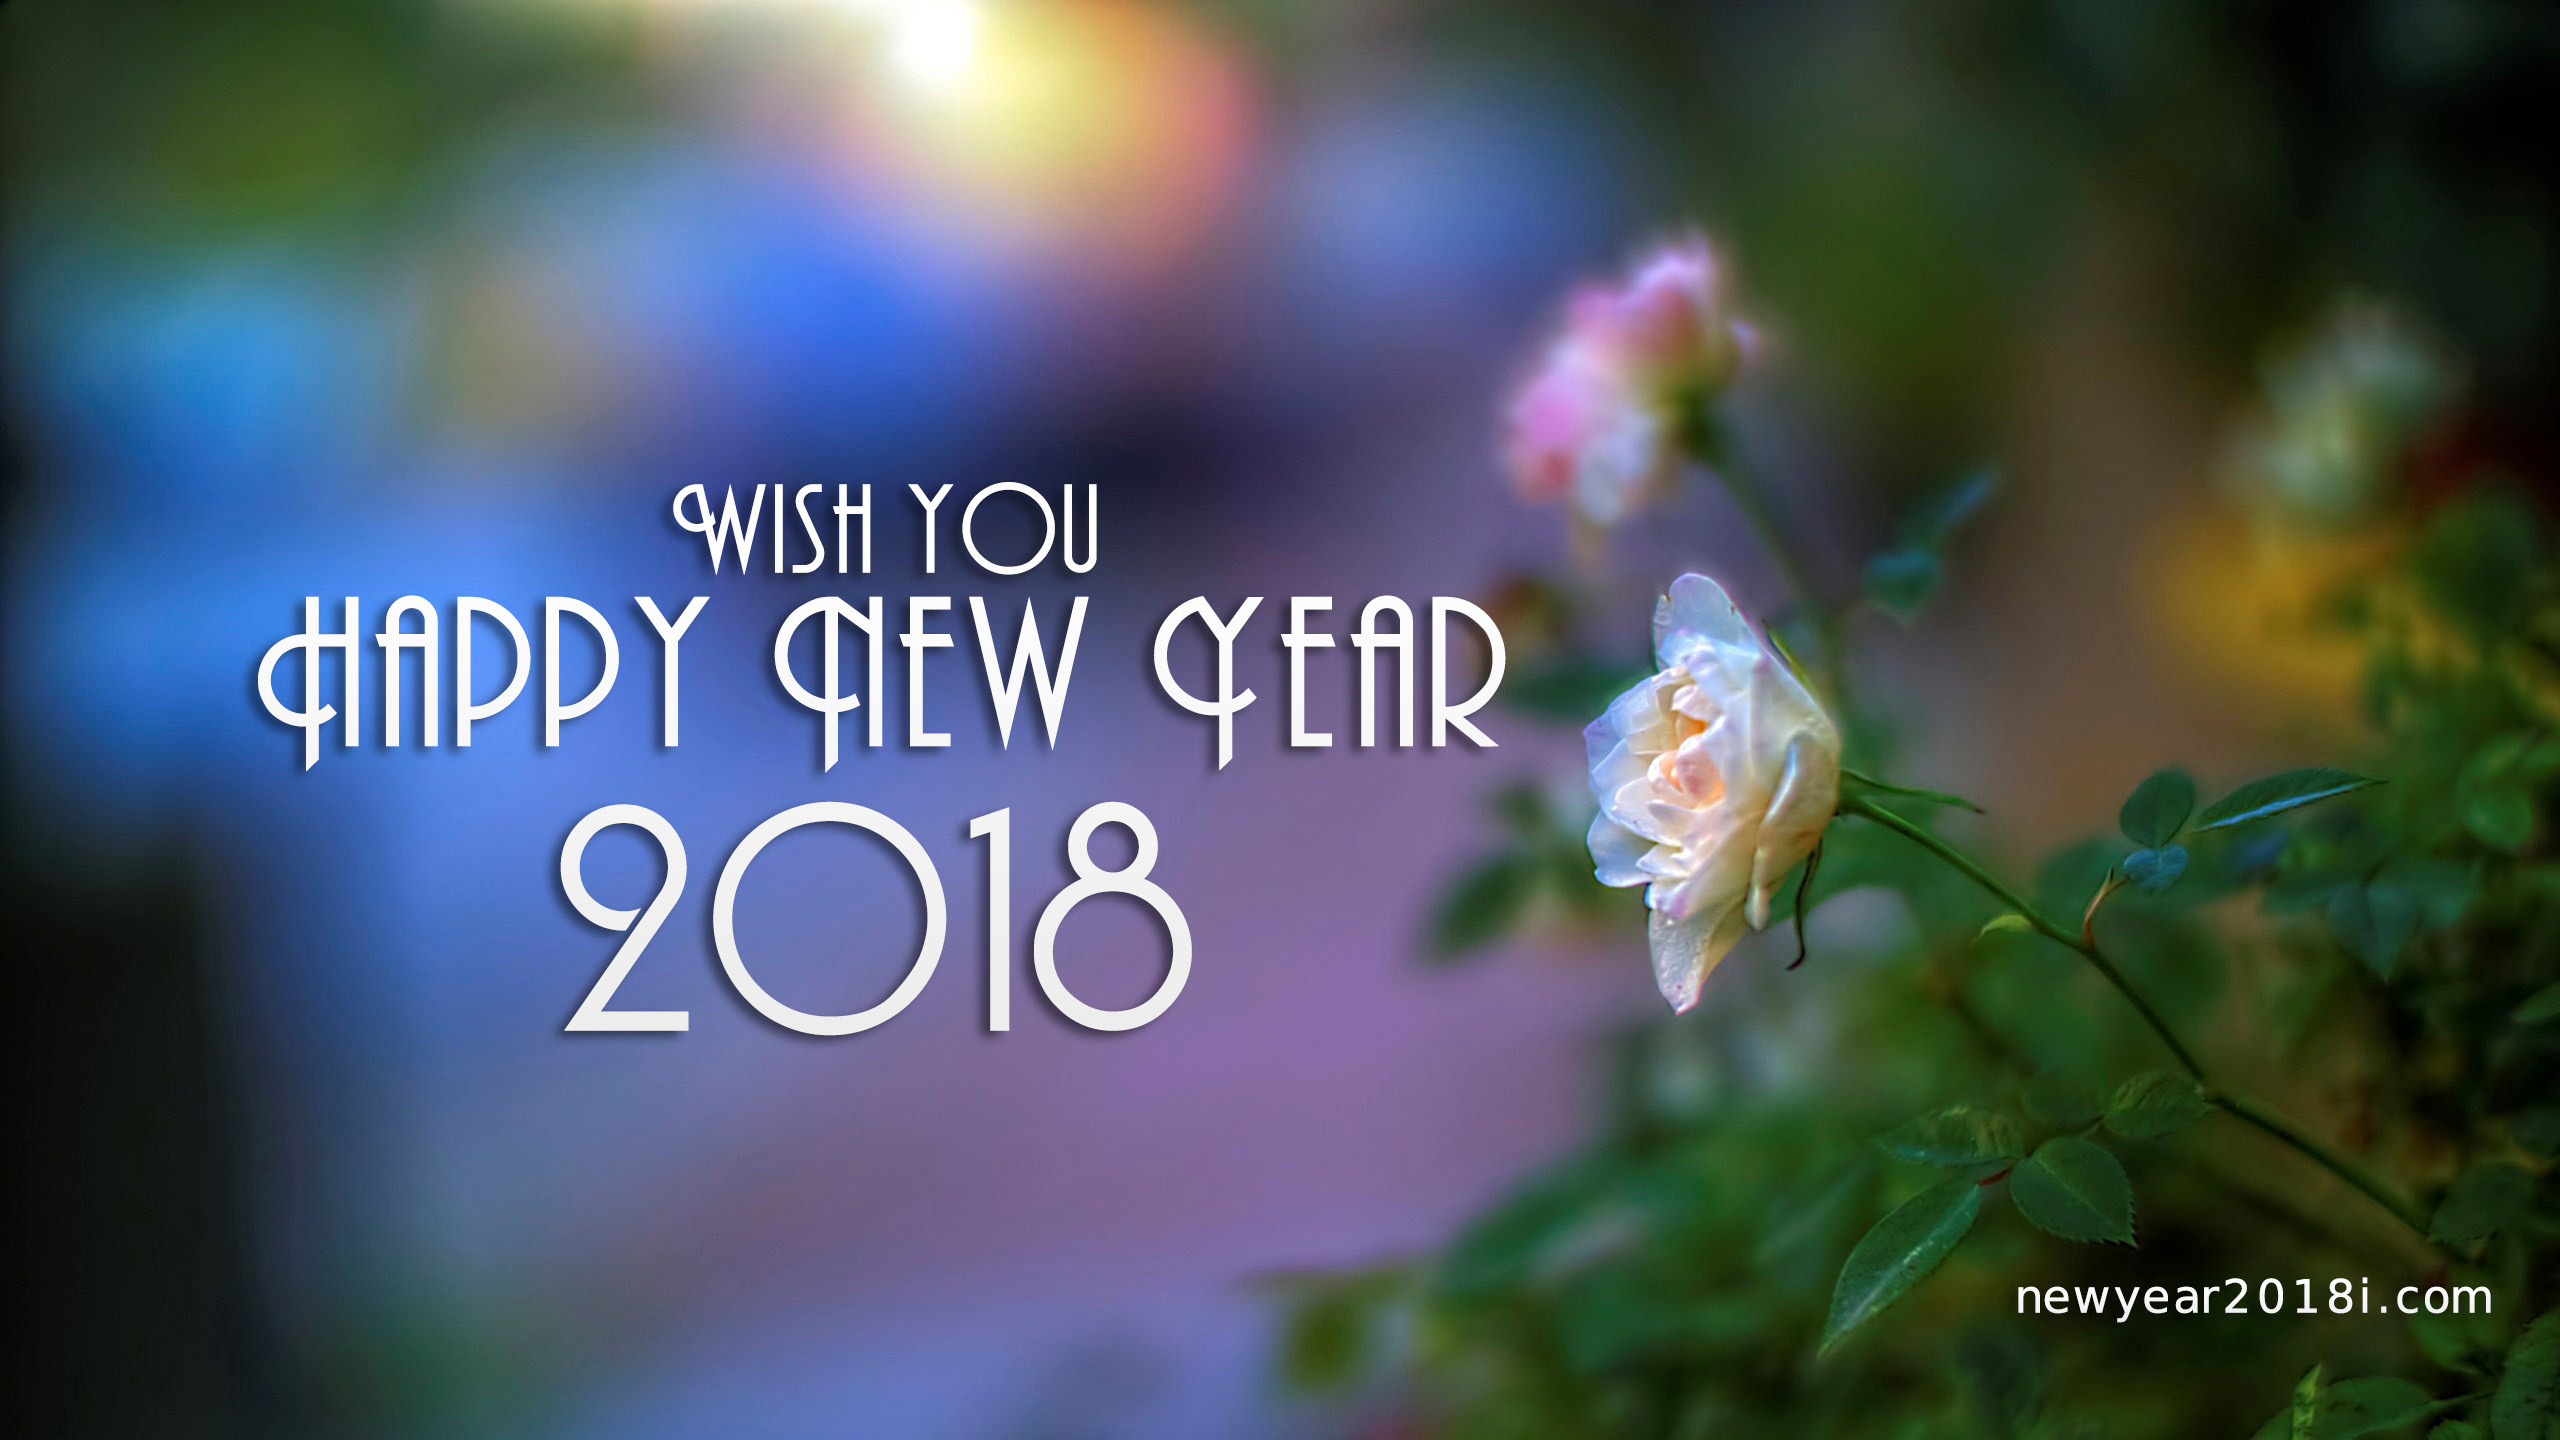 2560x1440 ... remarkable collection of Happy New Year 2018. so Lest Explore our  beautiful Showcase of New Year Images 2018 for Facebook, Whatsapp, Tumbler,  Twitter.